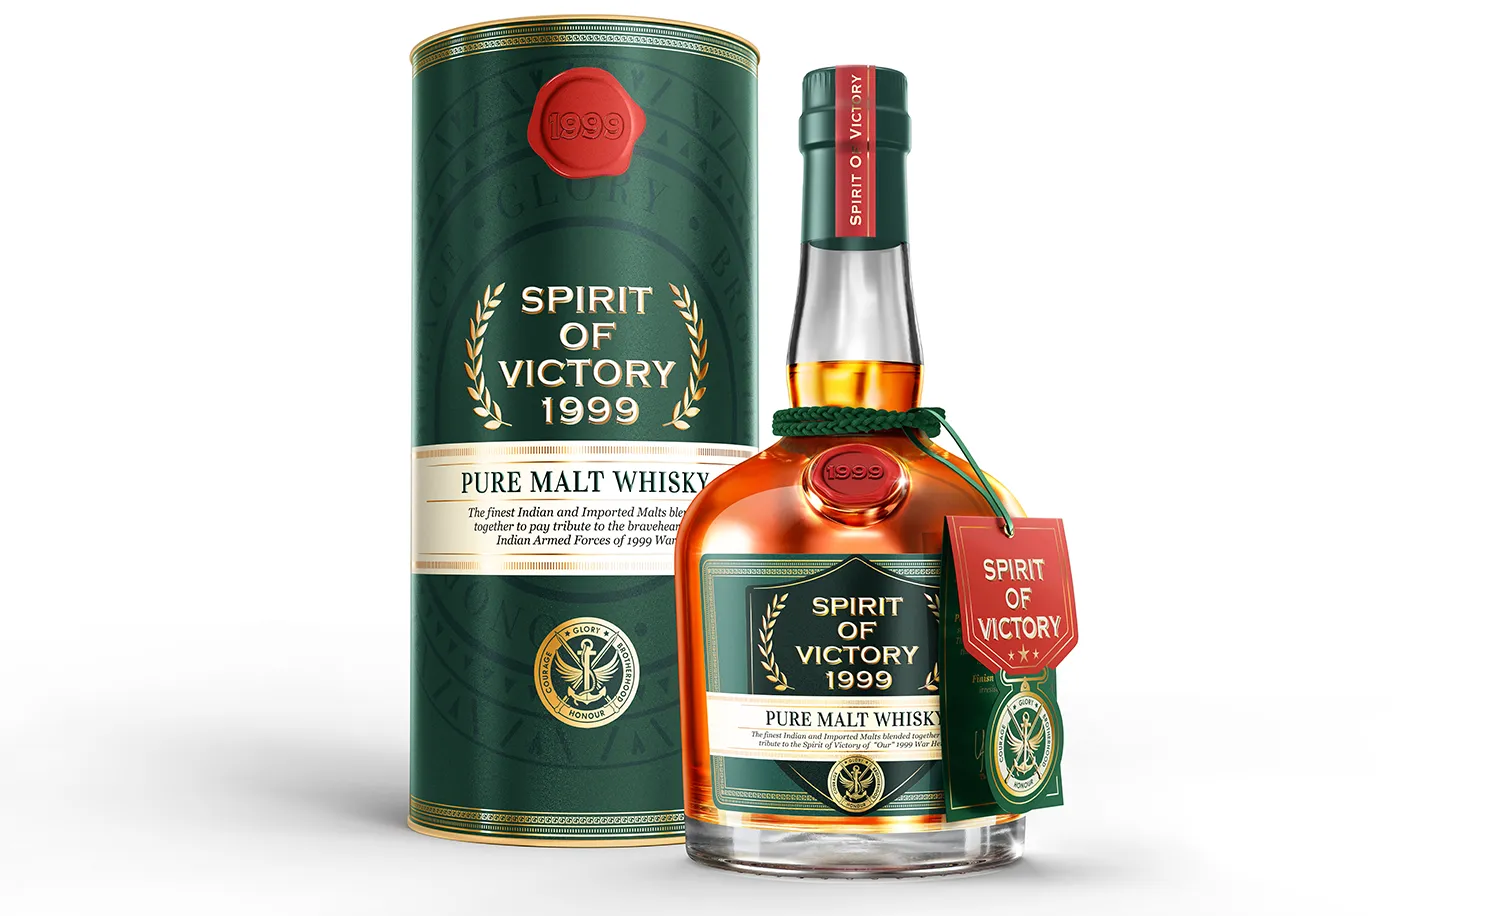 Spirit of Victory 1999 Pure Malt Whisky launched